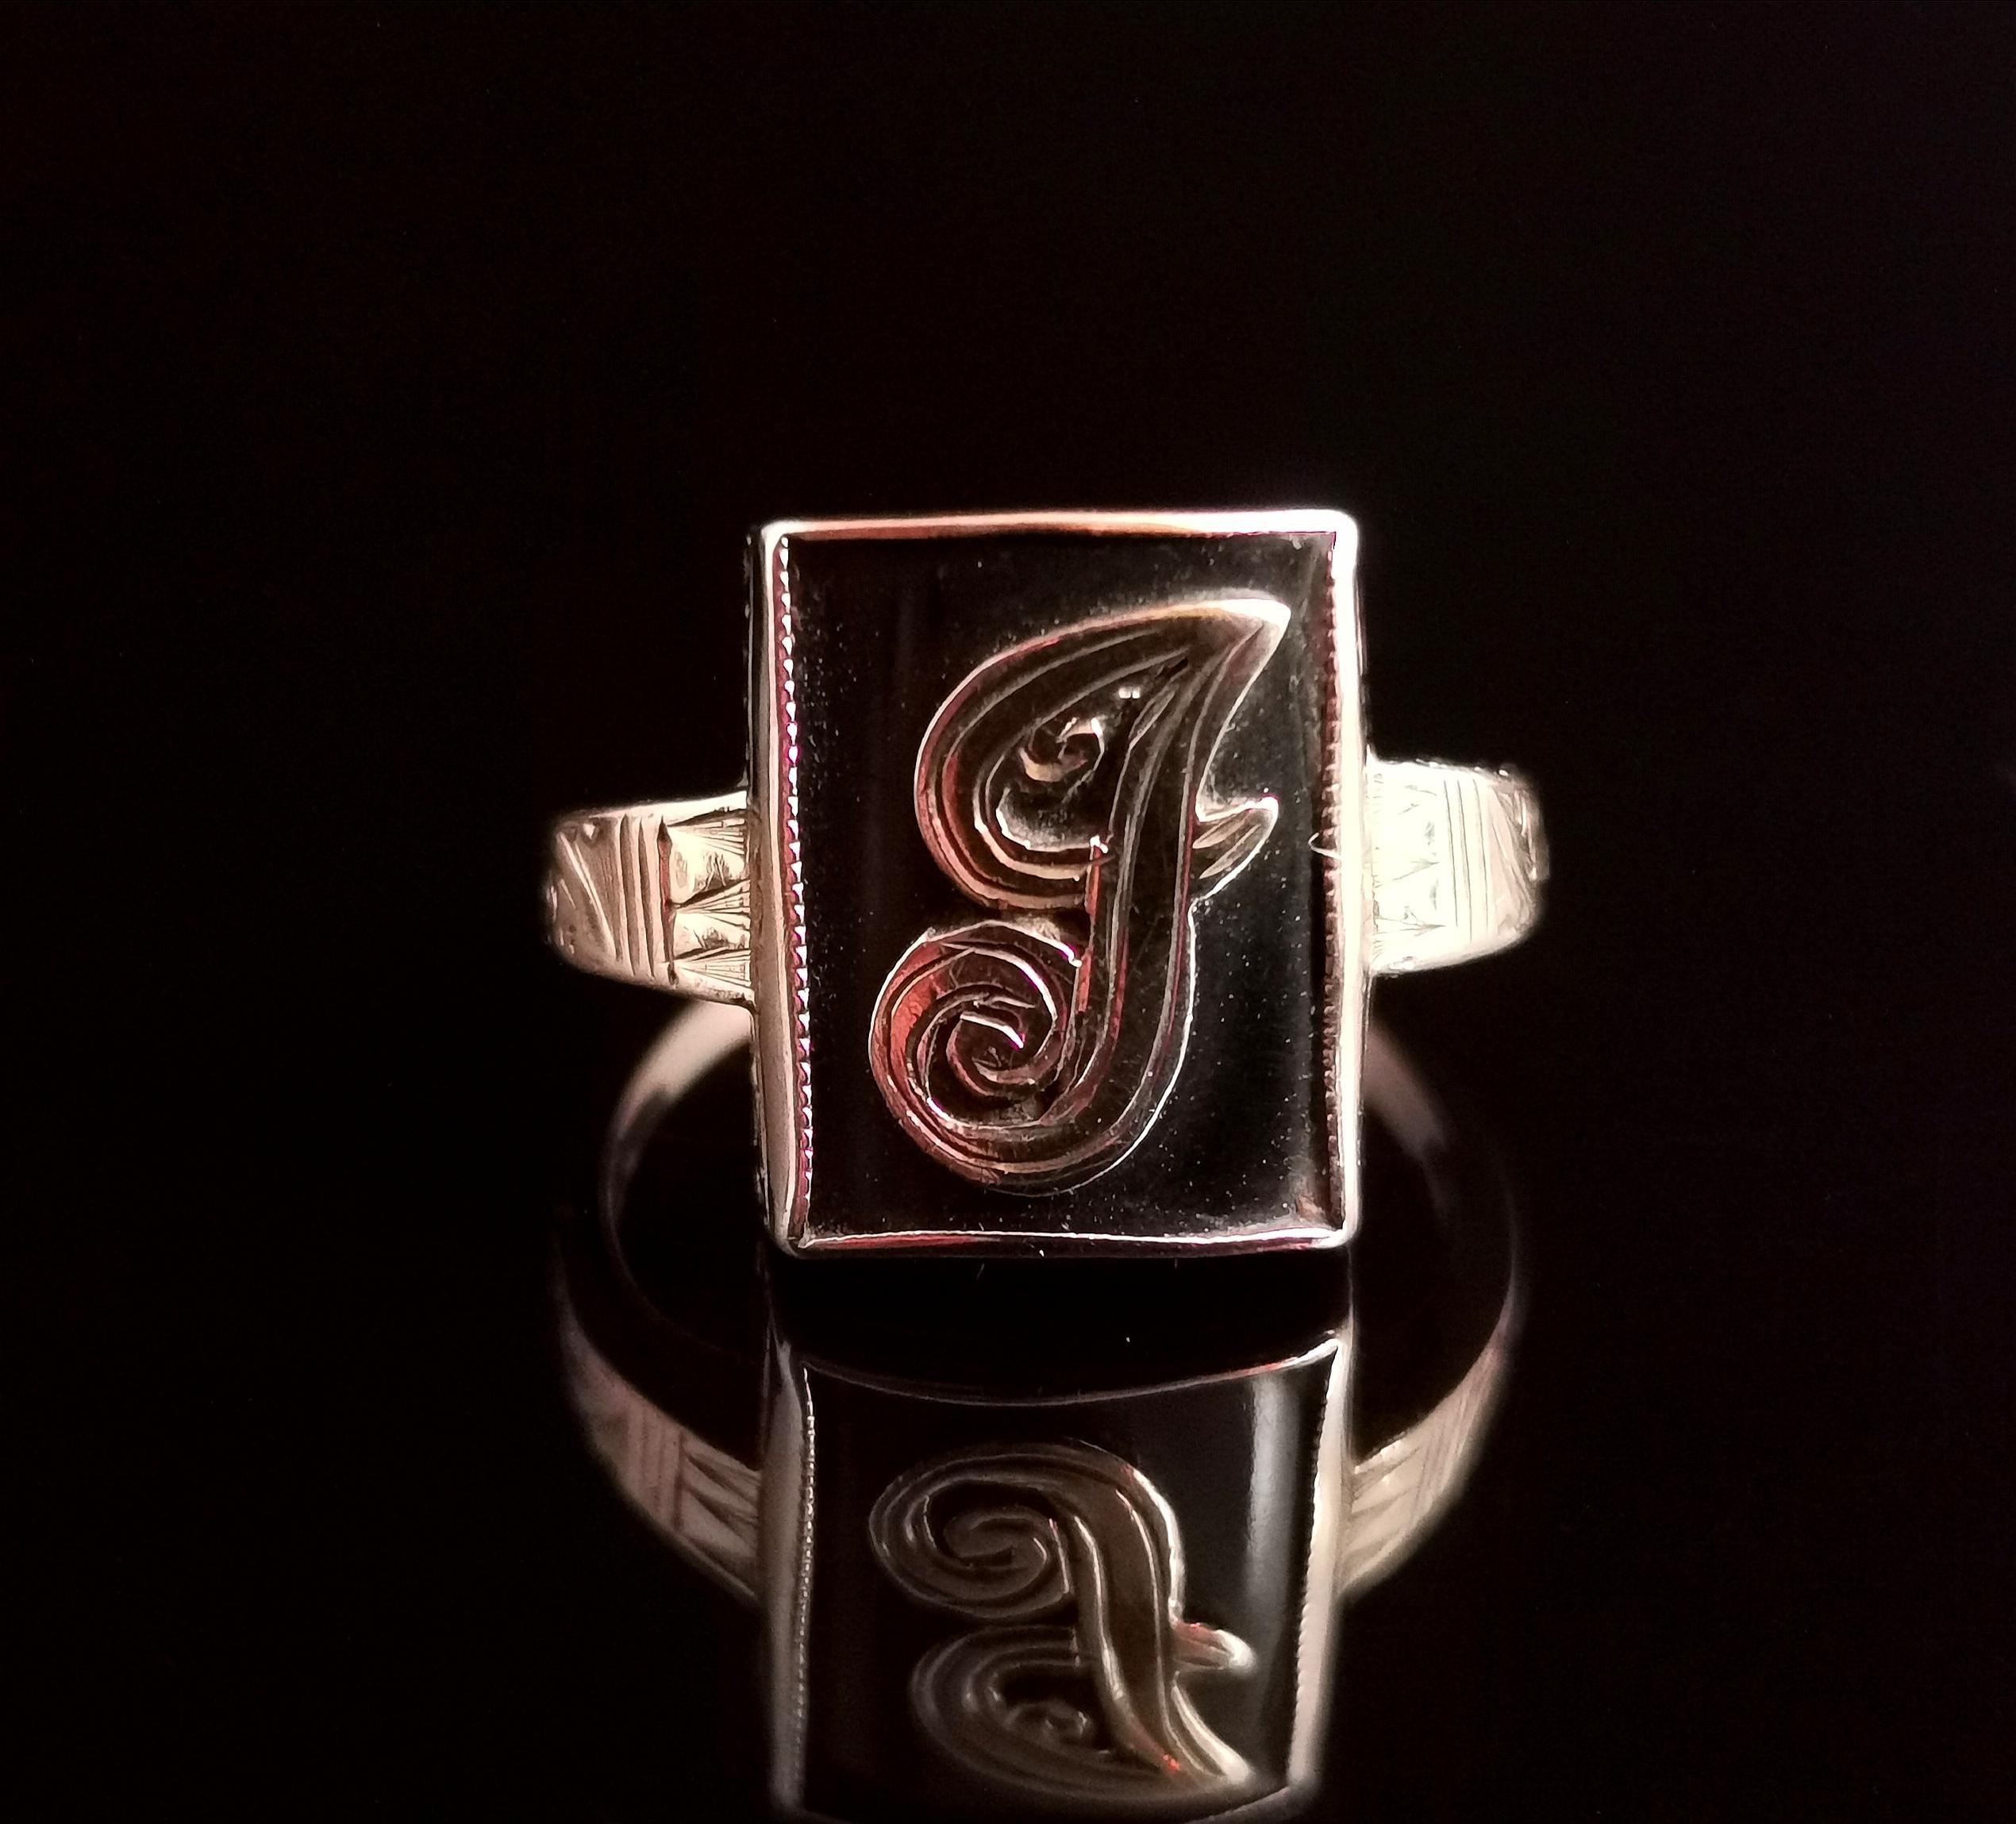 A gorgeous antique, late Victorian era mourning ring.

This is an initial ring with an applied gold letter J, set on a rich black onyx panel.

The ring has decorative engraved shoulders and stone setting and a smooth polished band at the back, a